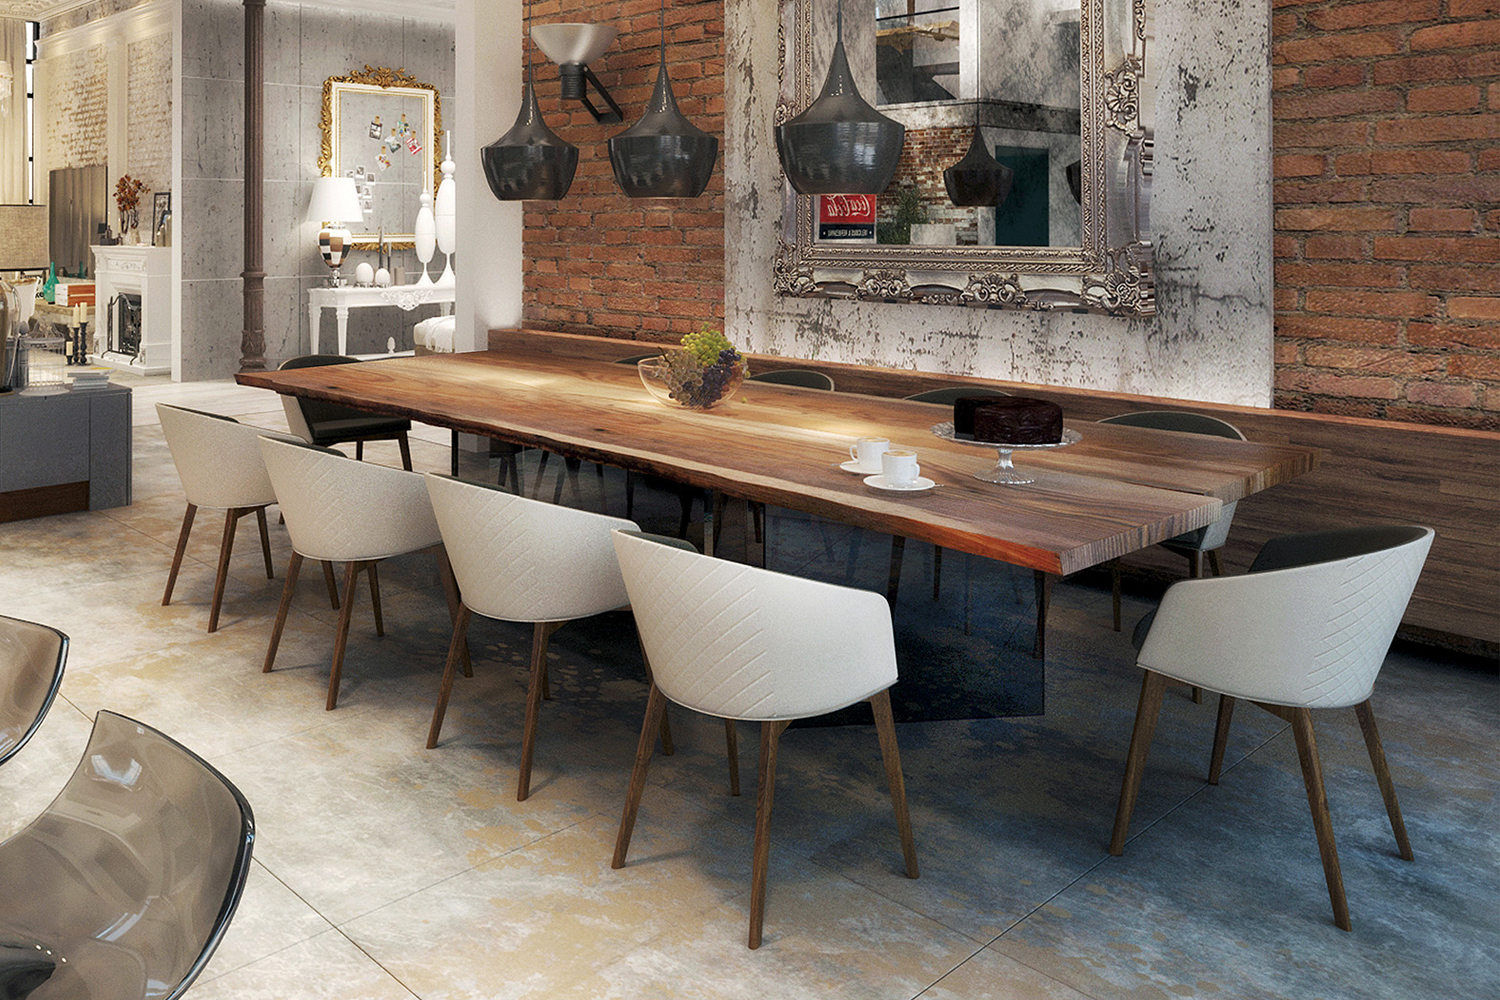 Luxury Dining Room Sets, Luxury Dining Room Tables And Chairs Uk